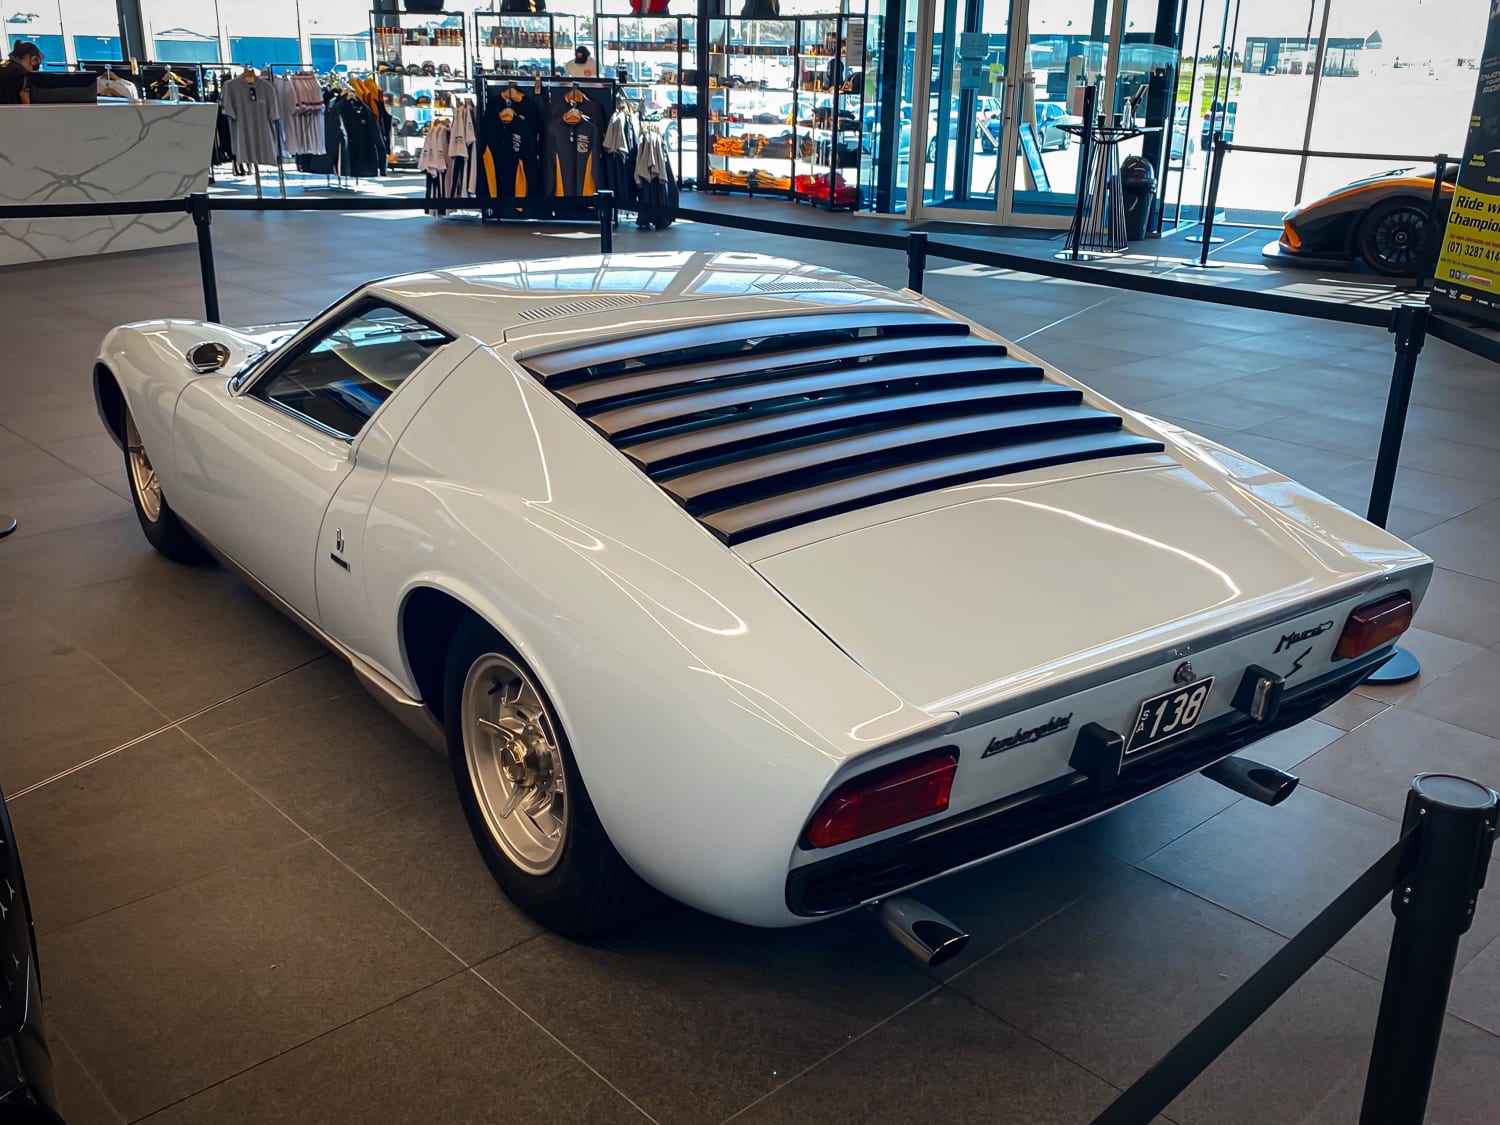 Stunning Lamborghini Miura in baby Blue! And YES it is BLUE